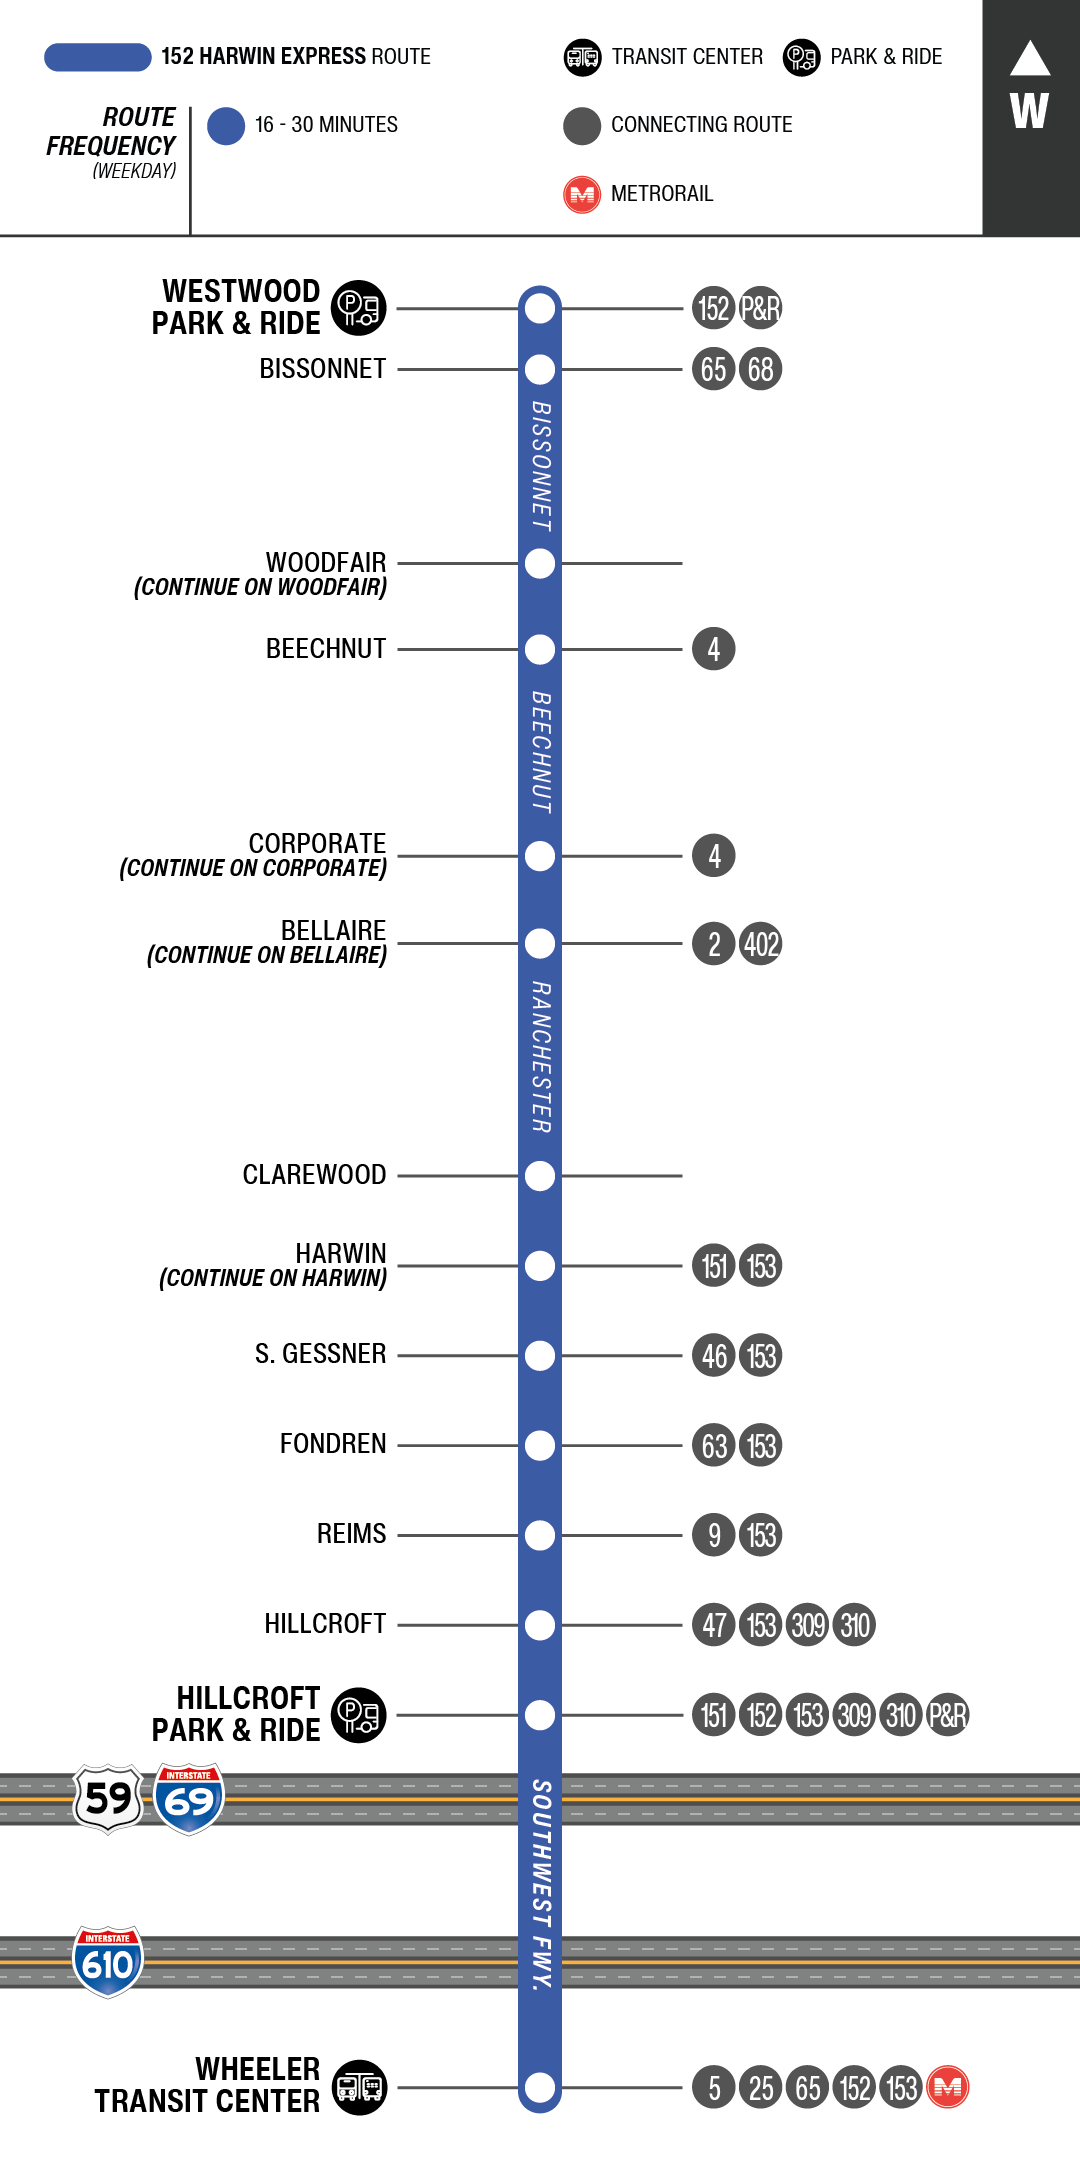 Route map for 152 Harwin Express bus